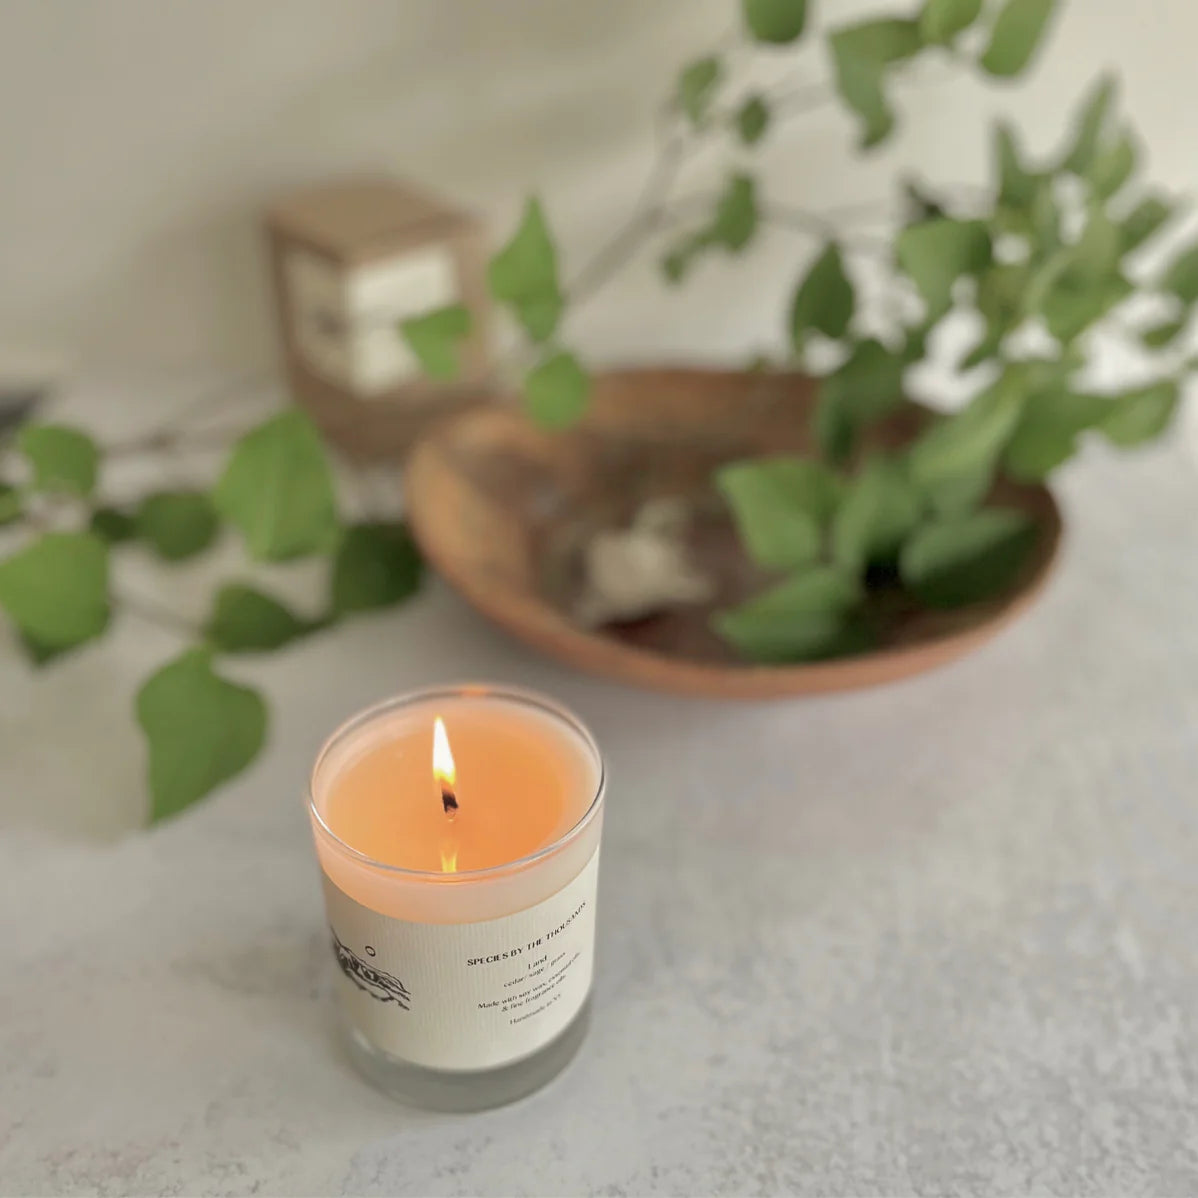 species by the thousands land candle / This hand poured candle is a sweet and calming evocation of the heart of the wilderness, with scents of cedar, sage & grass